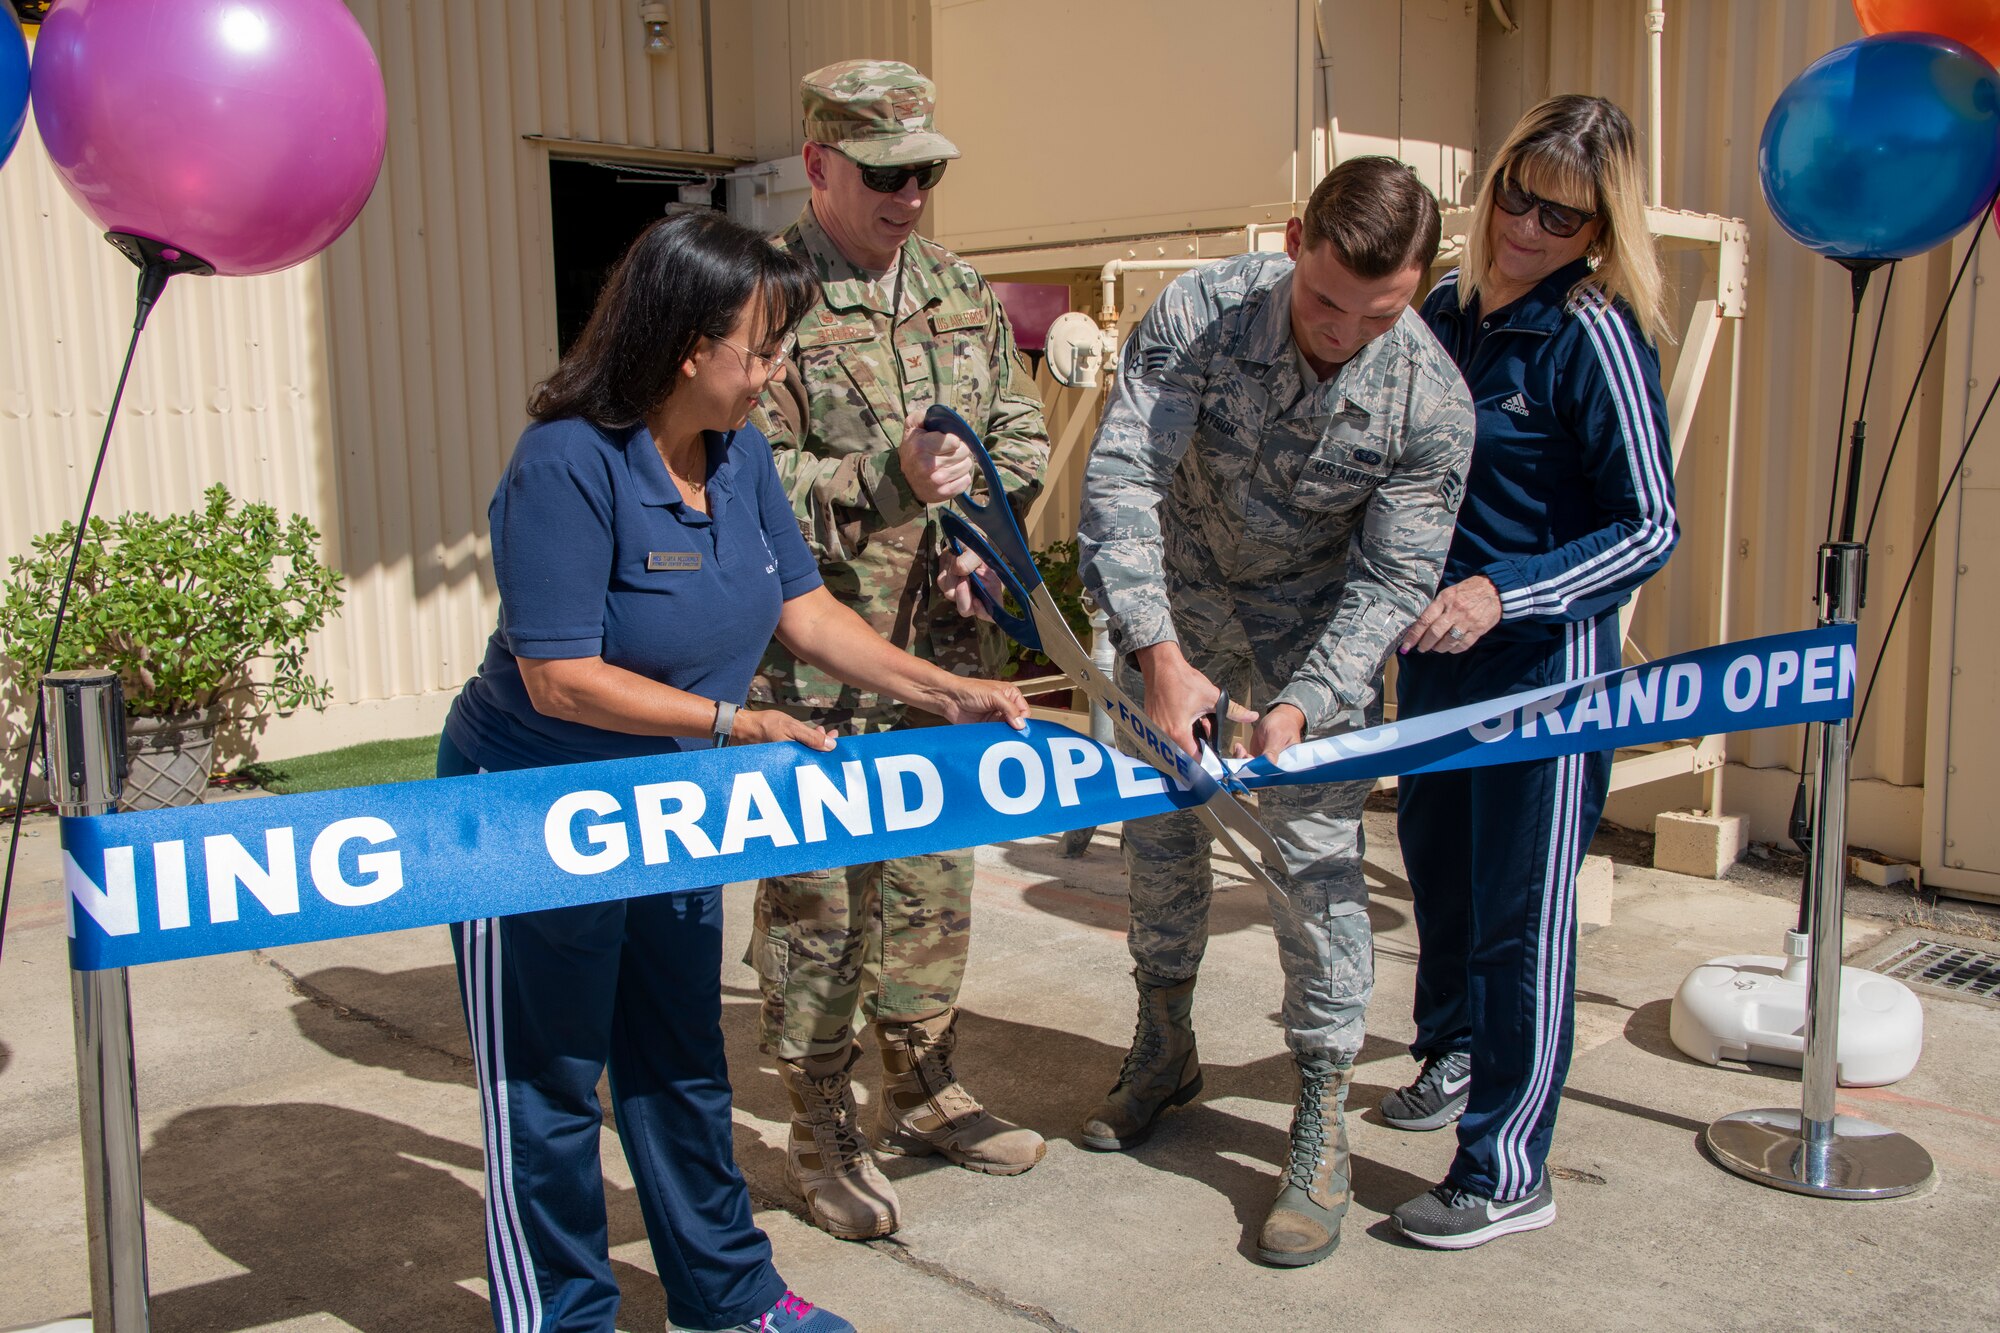 From left to right, Tanya McCormick, 60th Force Support Squadron fitness and sports center manager, U.S. Air Force Col. Victor Beeler, 60th Mission Support Group commander, Senior Airman Joshua Knutson, fitness specialist and Barbara Green, programs director both with the 60th FSS, cut the ribbon to open the Nose Dock Gym Oct. 15, at Travis Air Force Base, California. The new gym at Building 844 was facilitated through existing base funds, equipment donations and volunteer work by the 60th Mission Support Group. The new facility is located on Nose Dock Lane off Ragsdale and V Street. Current operating hours are 6 – 8 and 4–8 p.m., subject to change. (U.S. Air Force photo by Heide Couch)